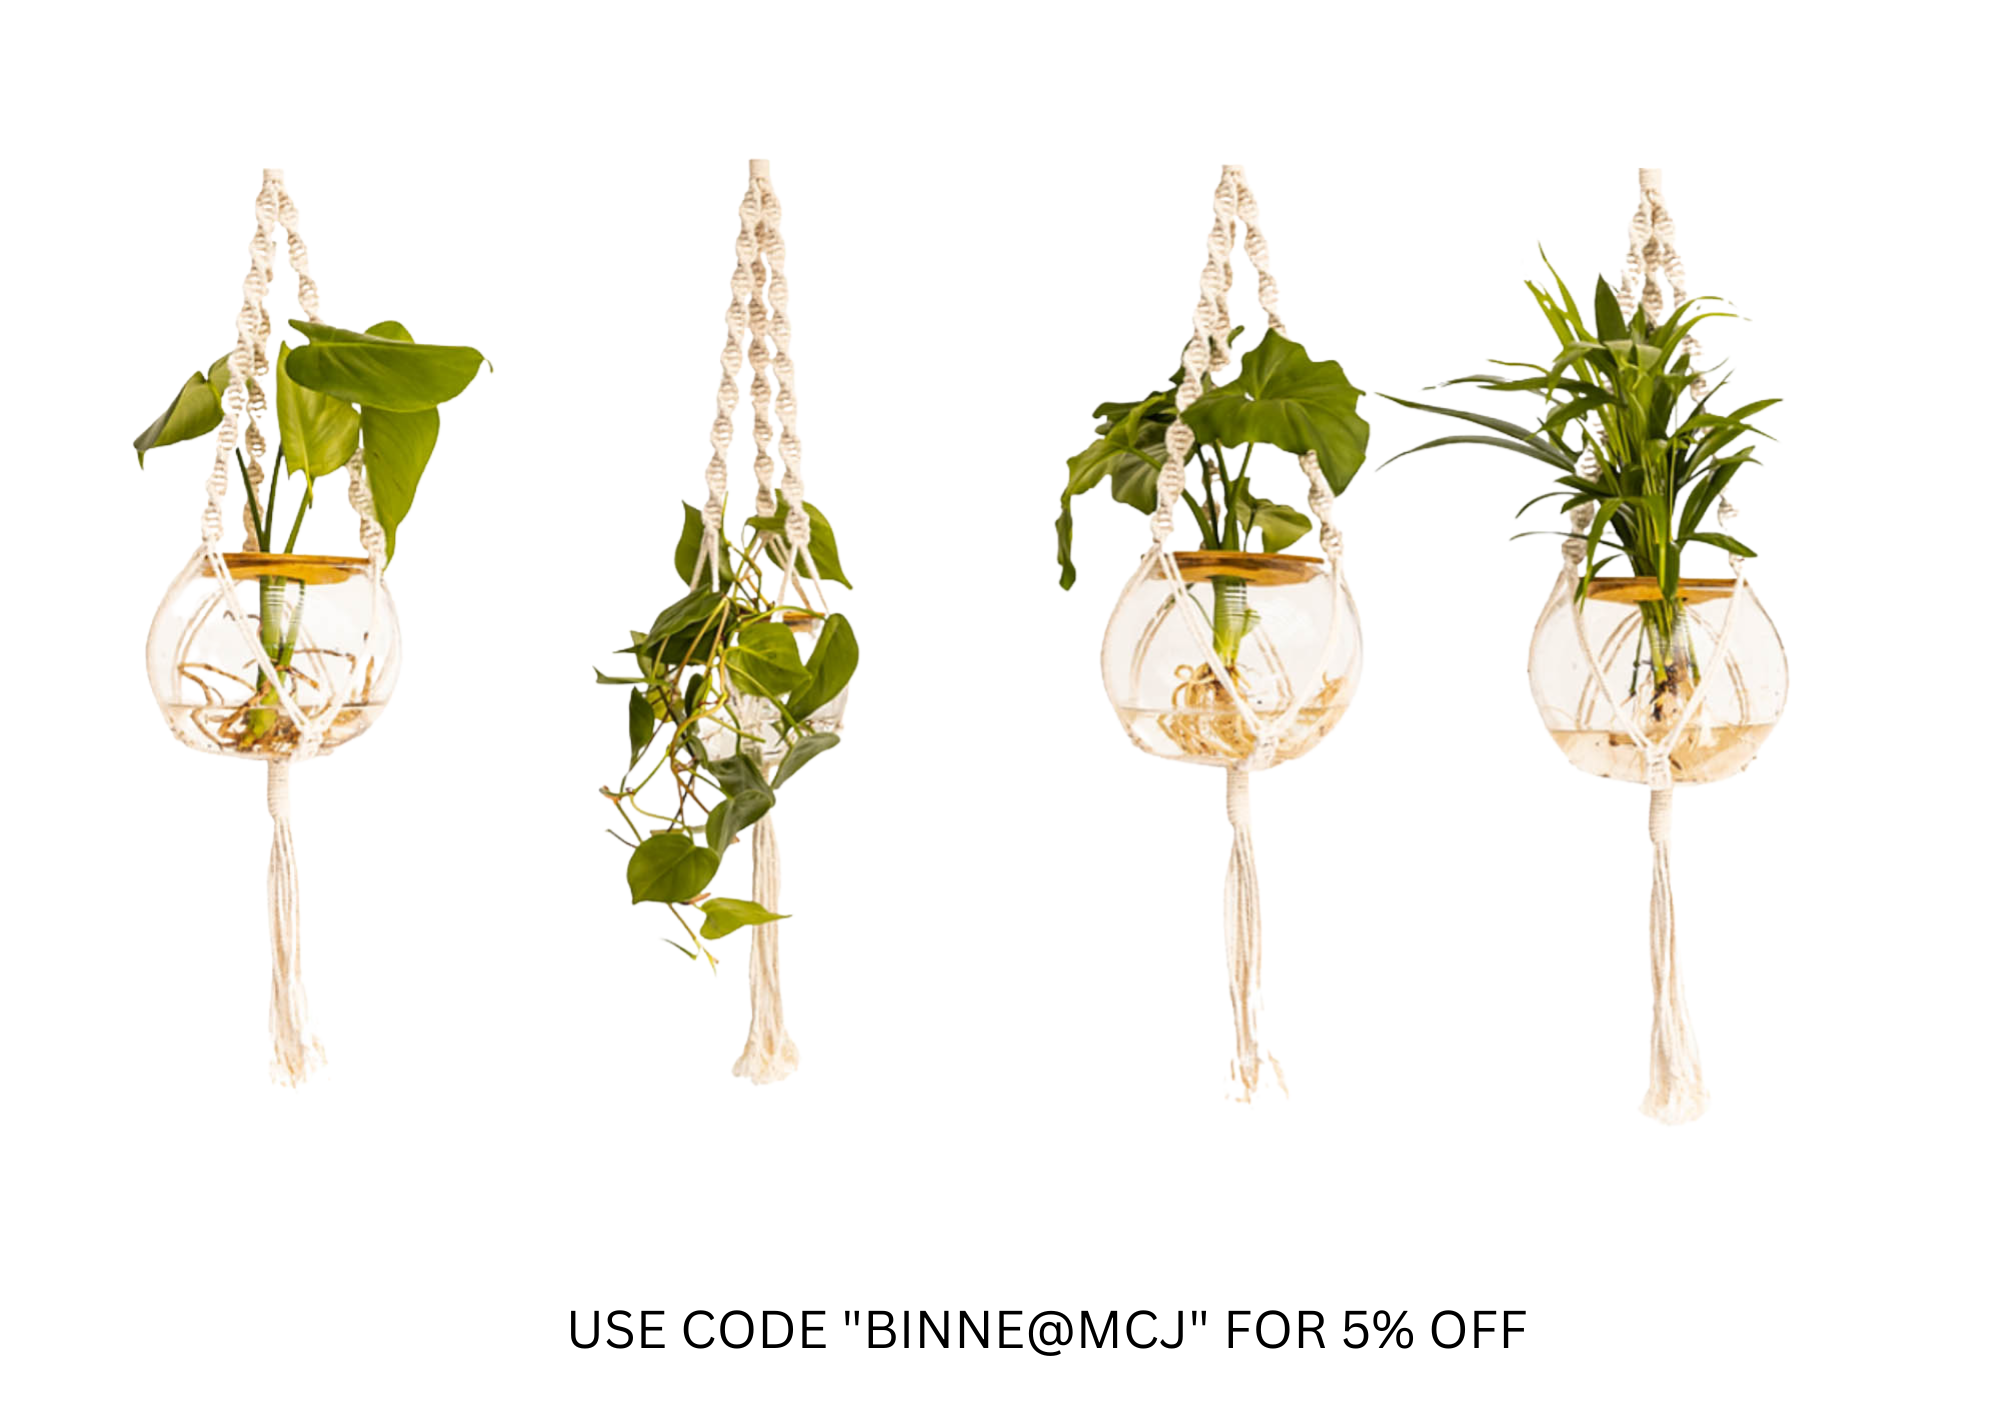 Suspended hydroponic plants